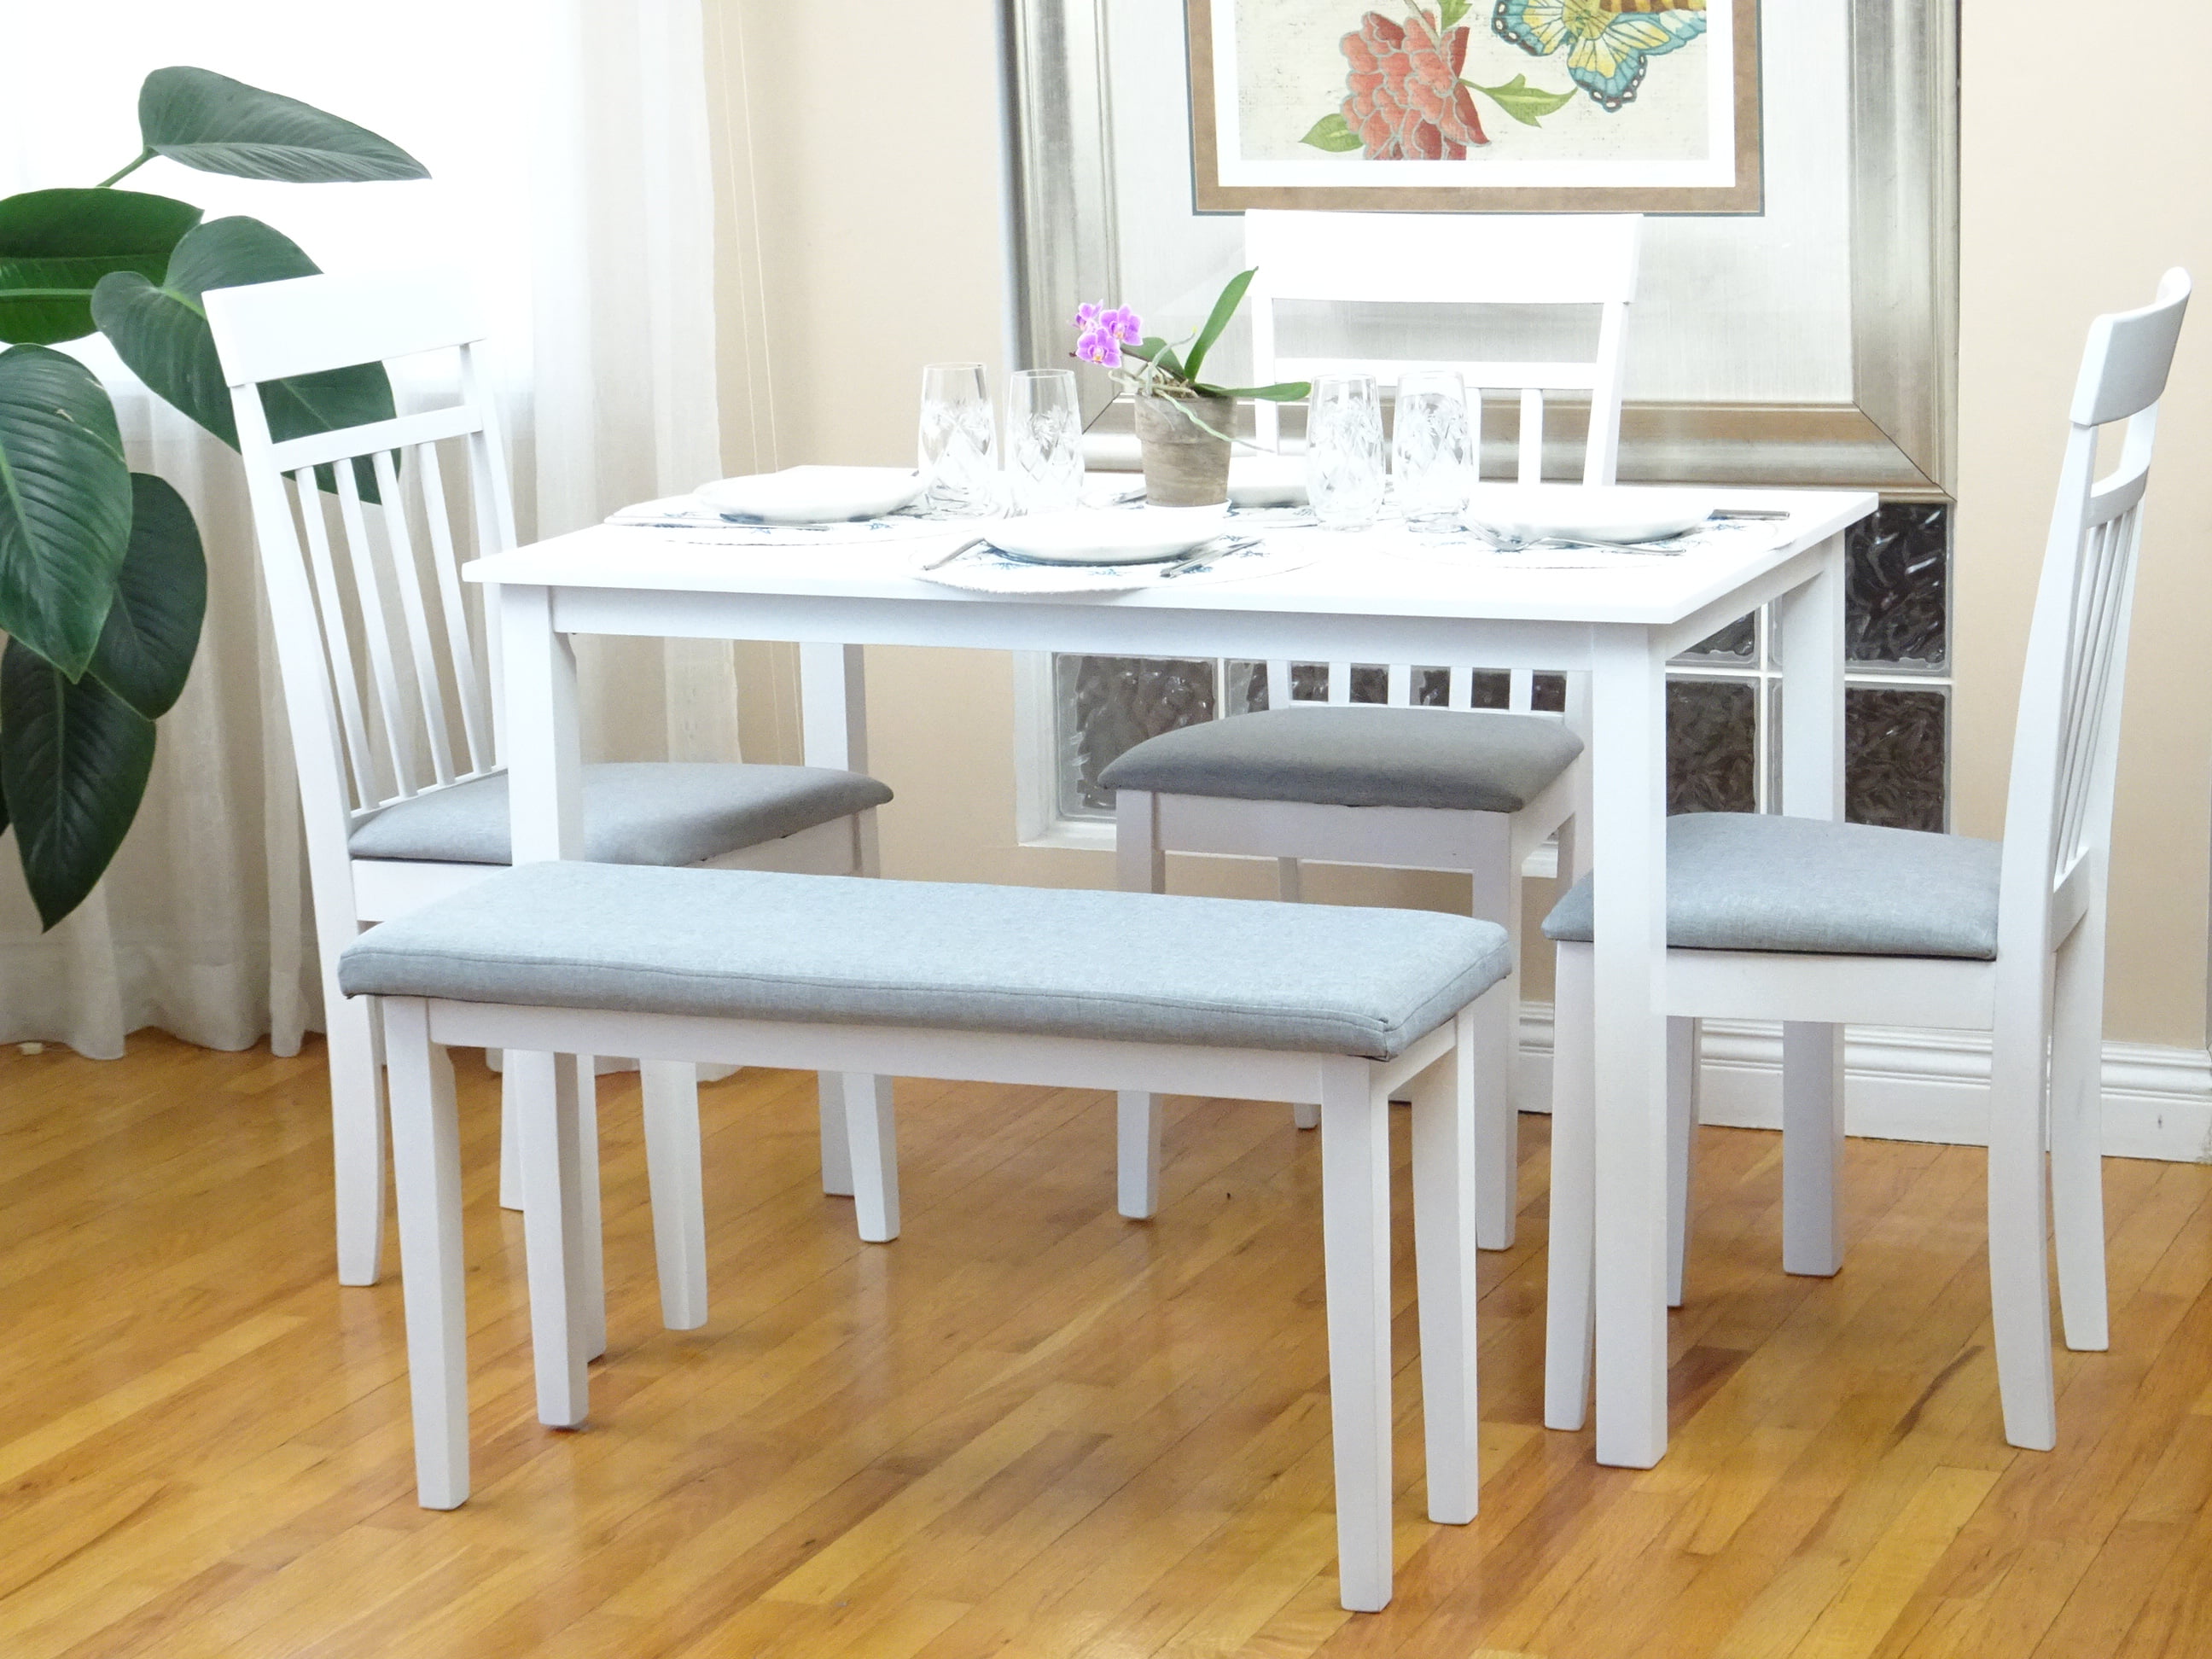  kitchen table sets with bench seating